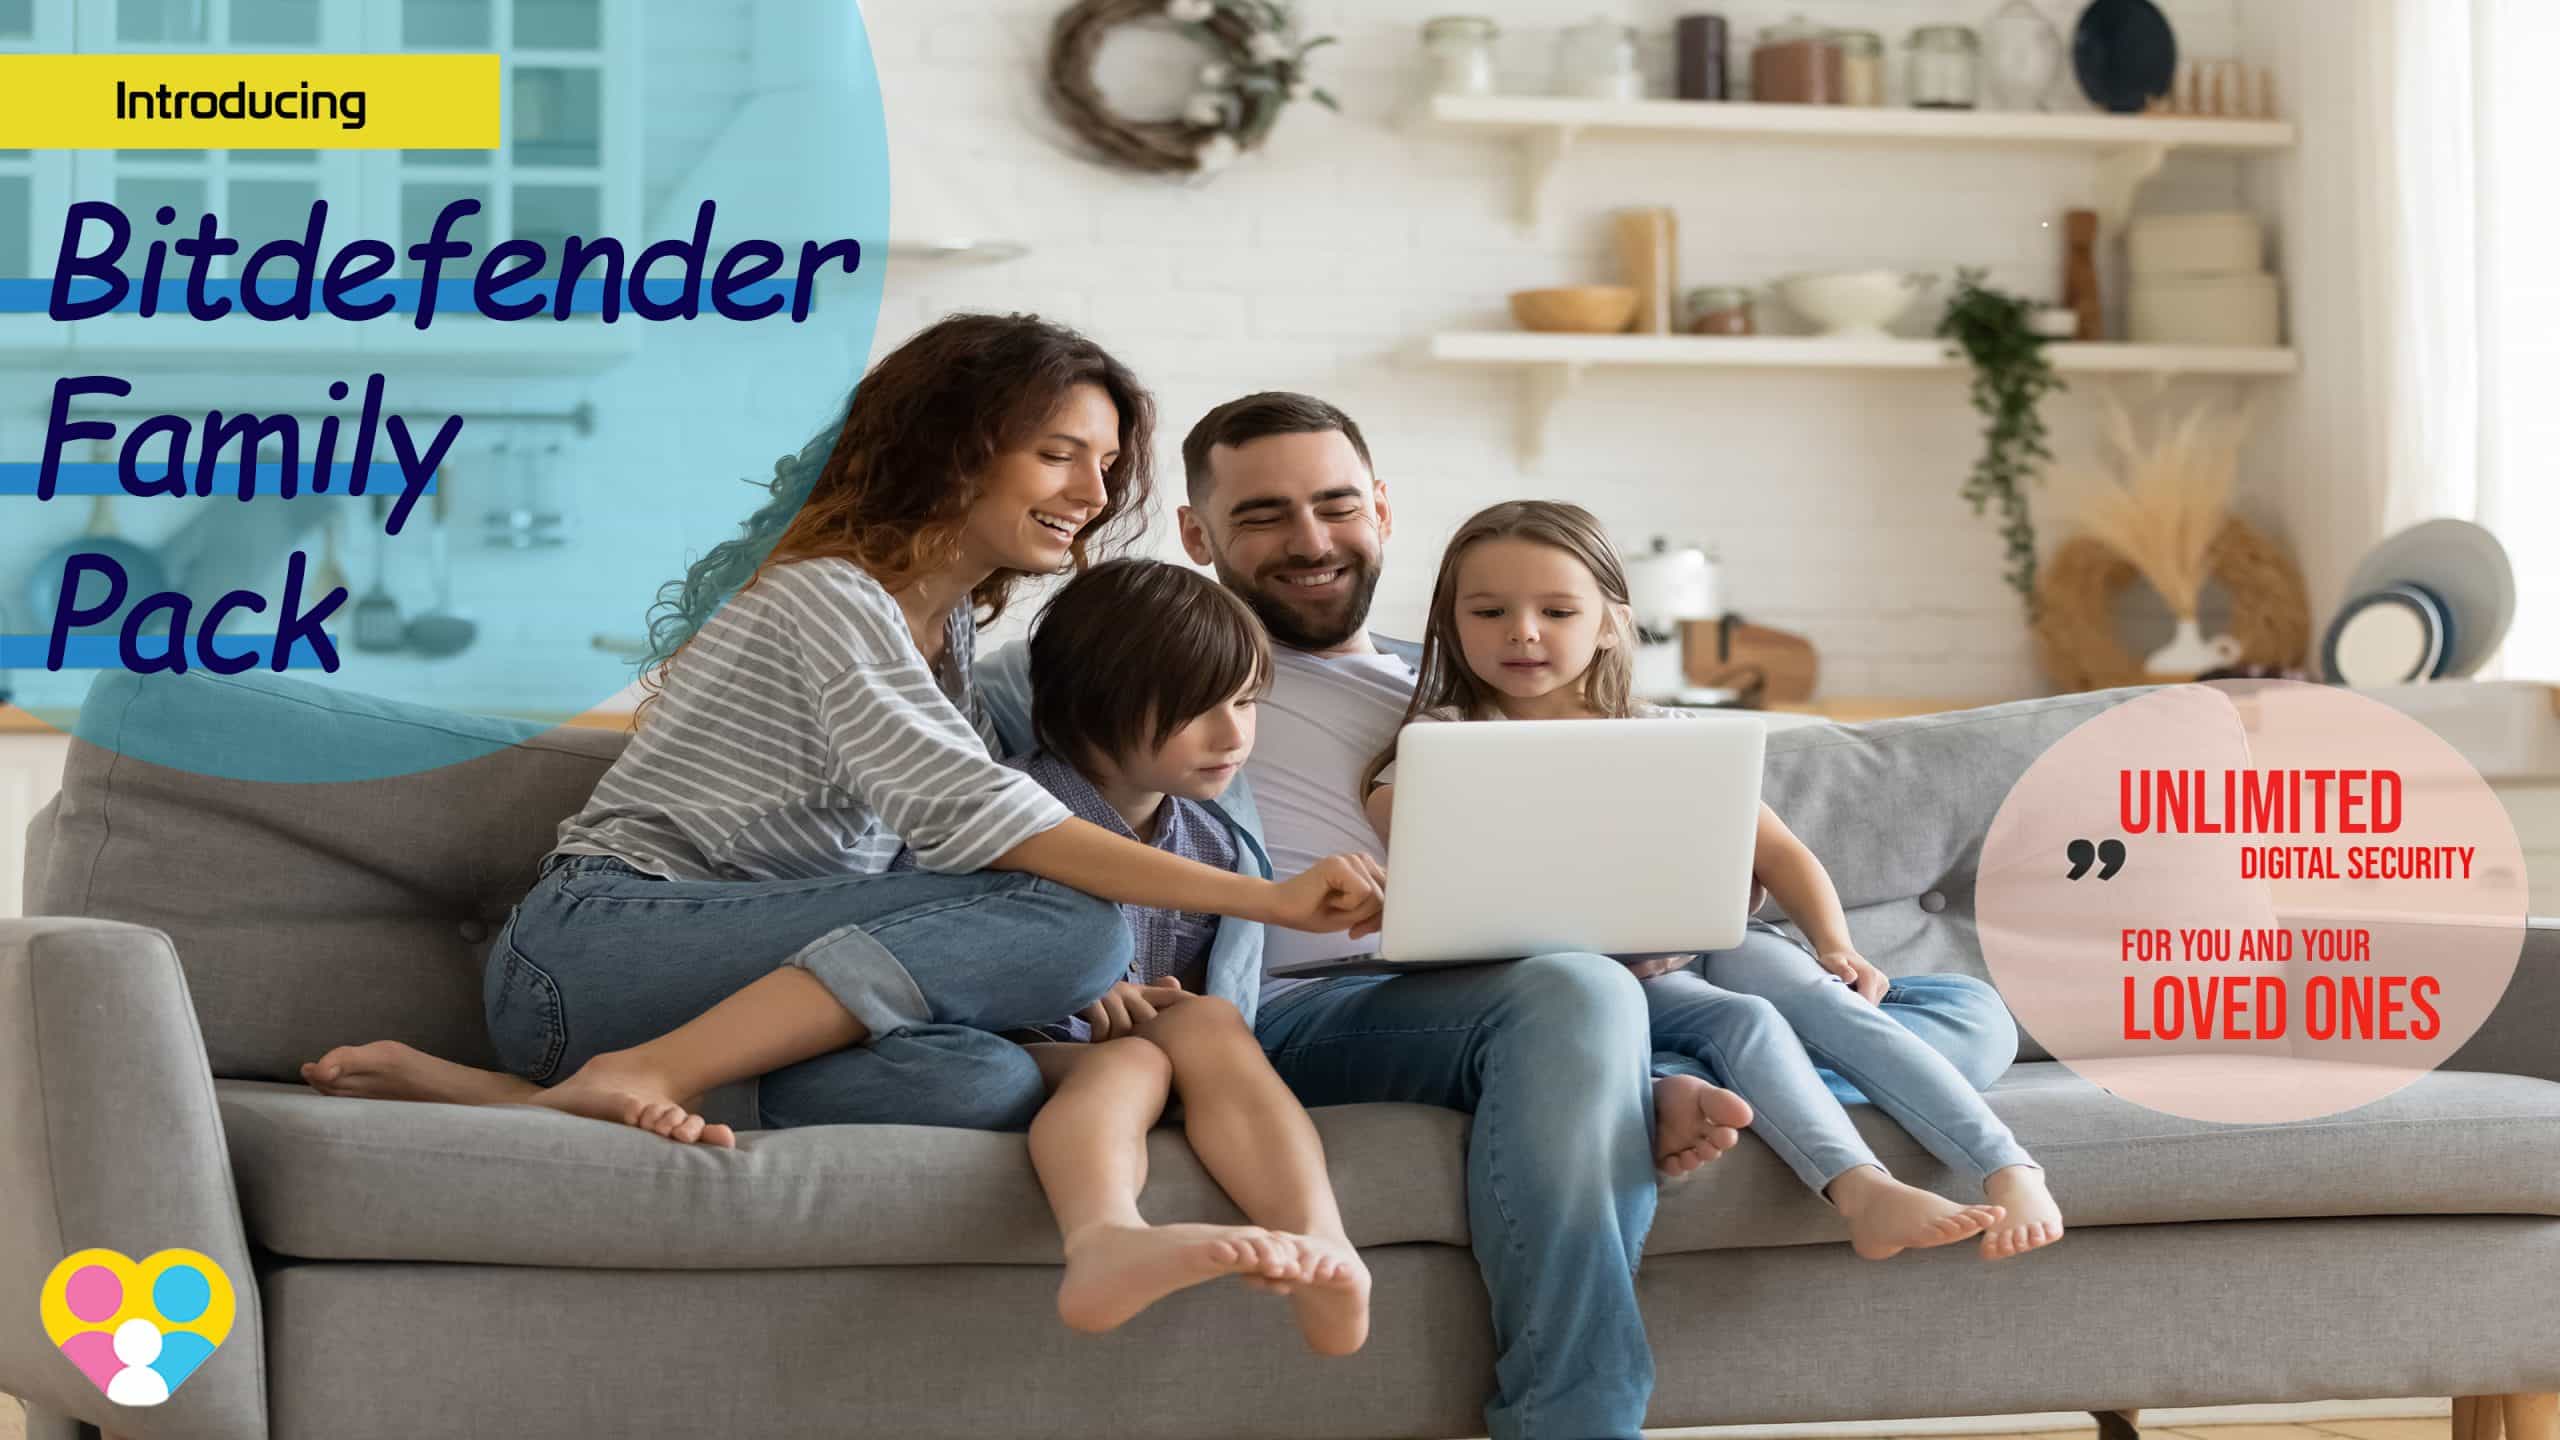 Bitdefender Family Pack: Unlimited Digital Security For You and Your Loved Ones